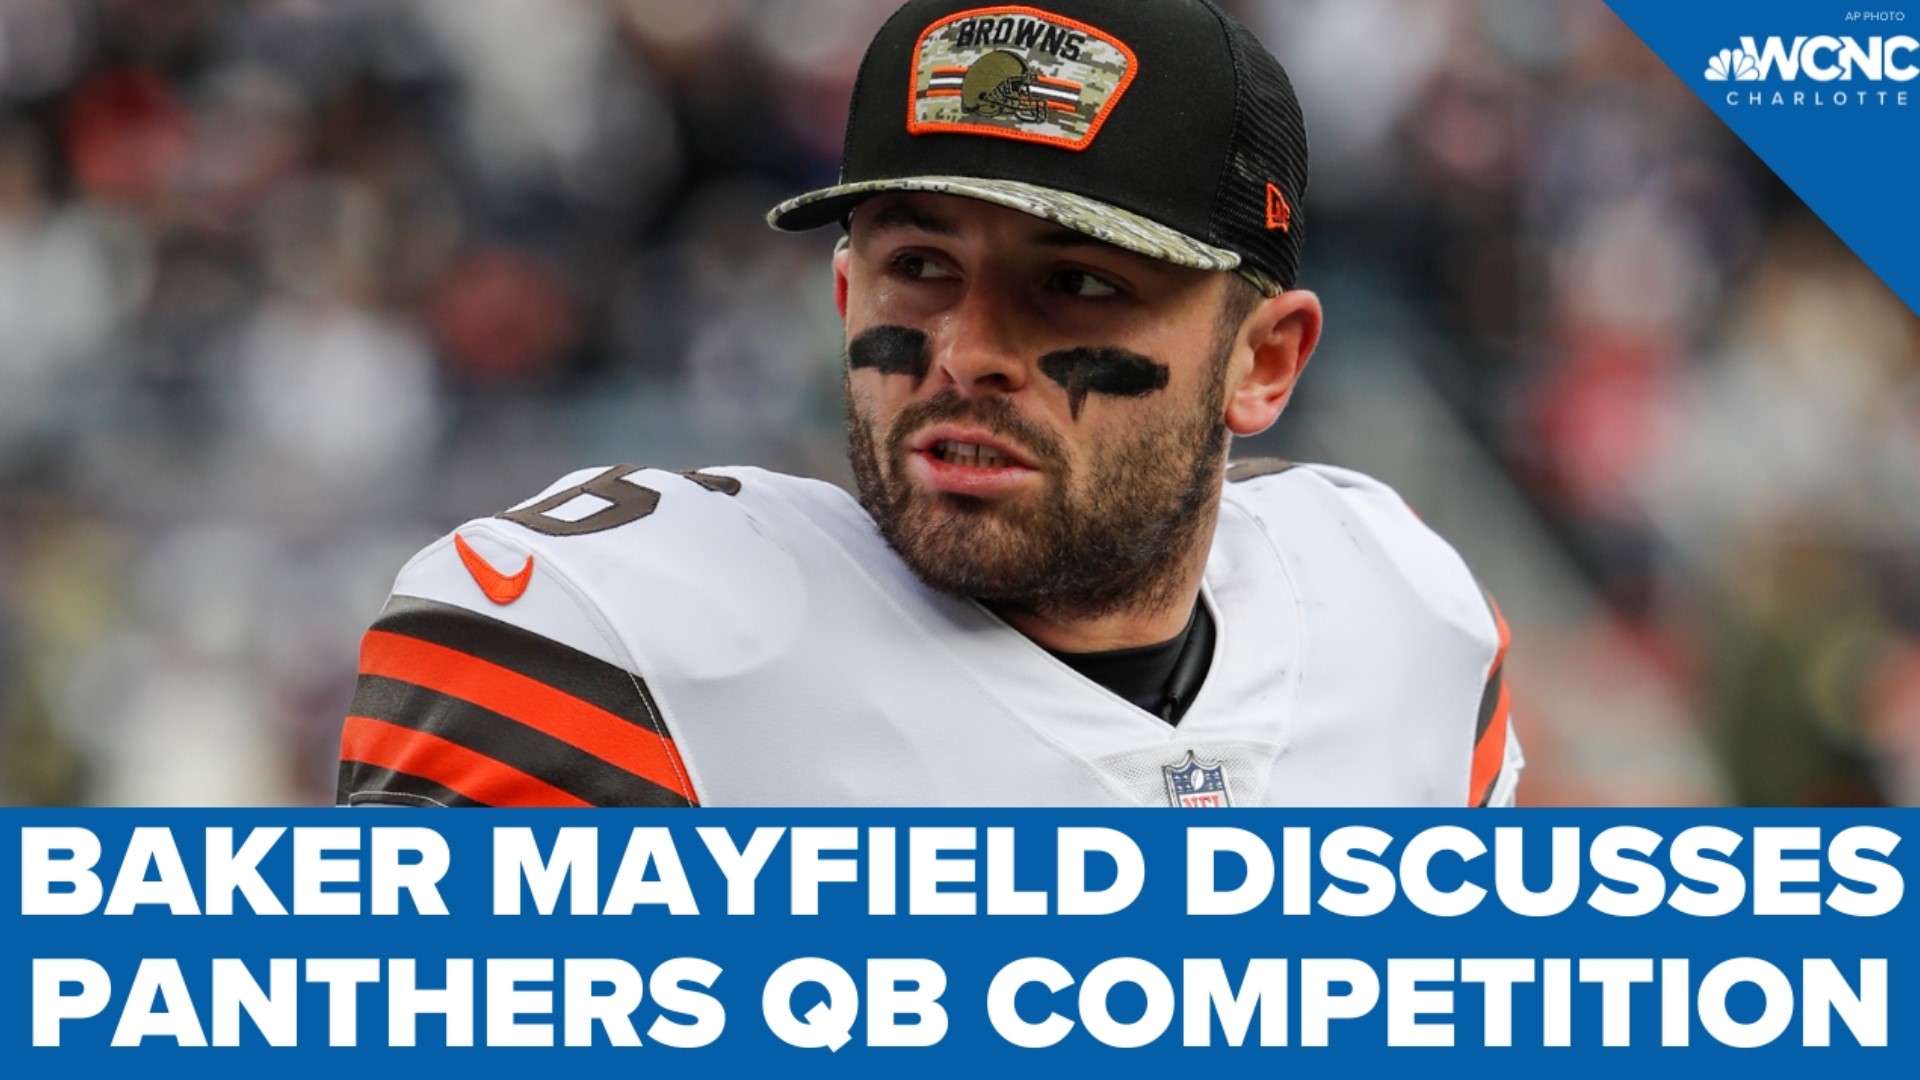 Here's What To Expect From Baker Mayfield With Panthers In 2022